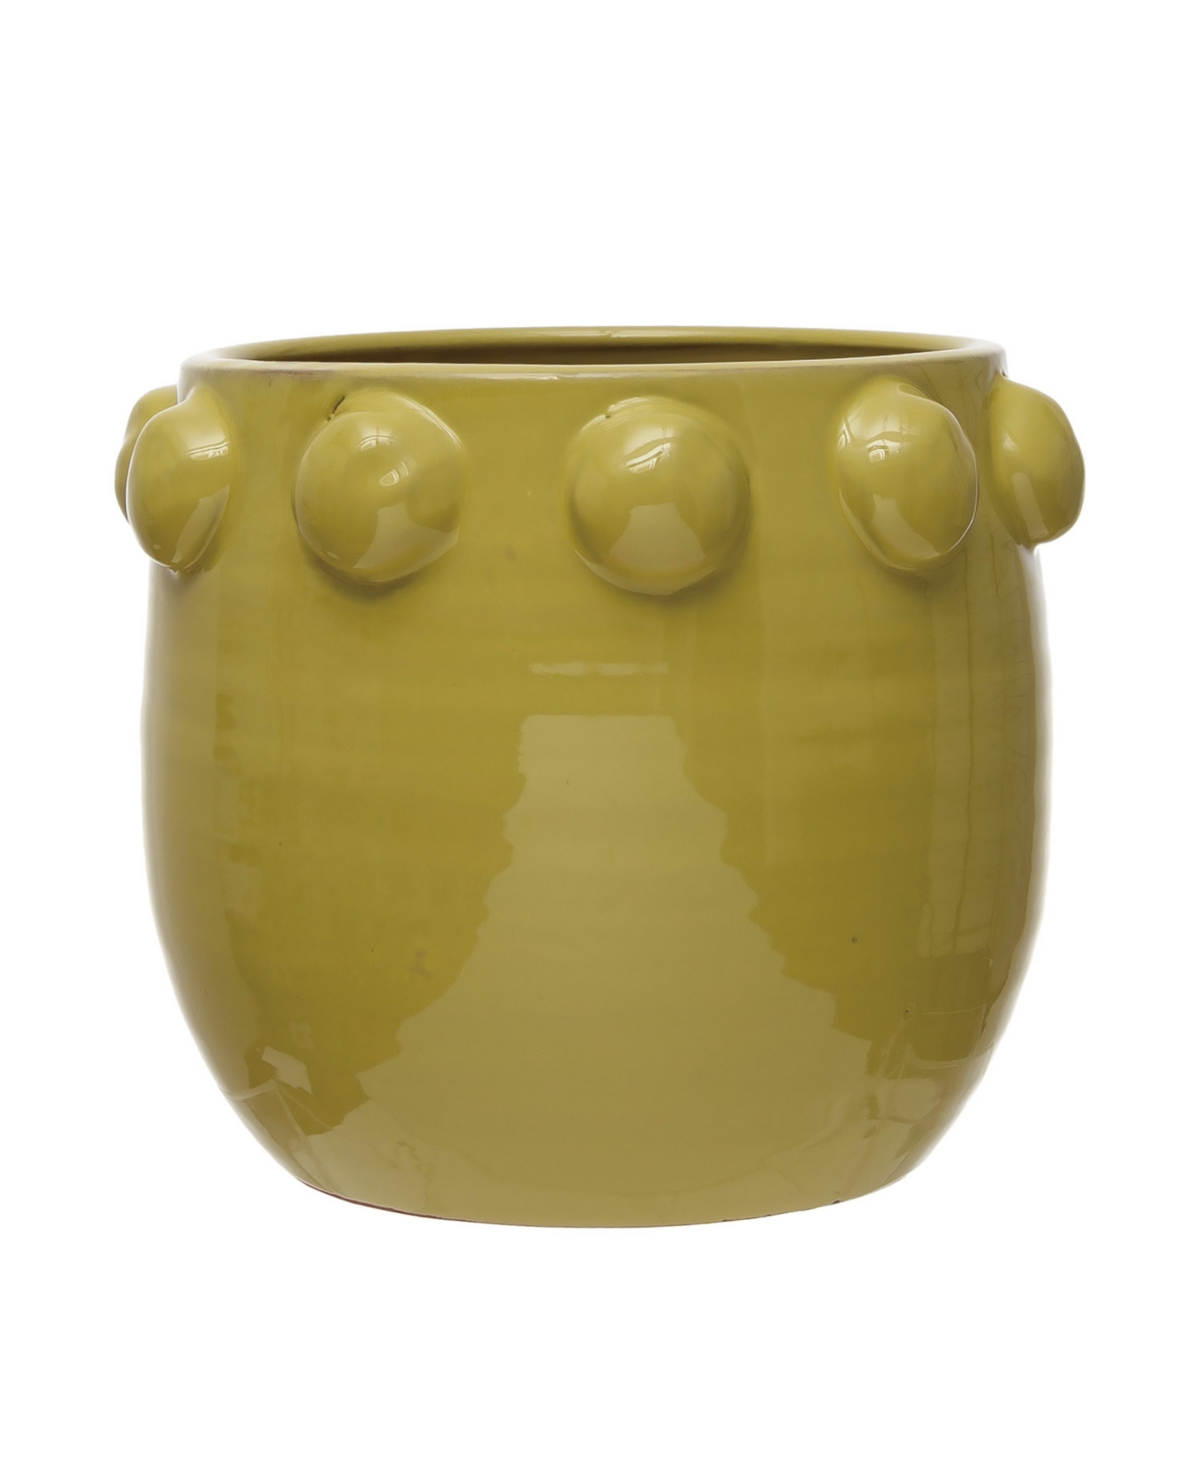 Terra-Cotta Planter with Raised Dots - Green